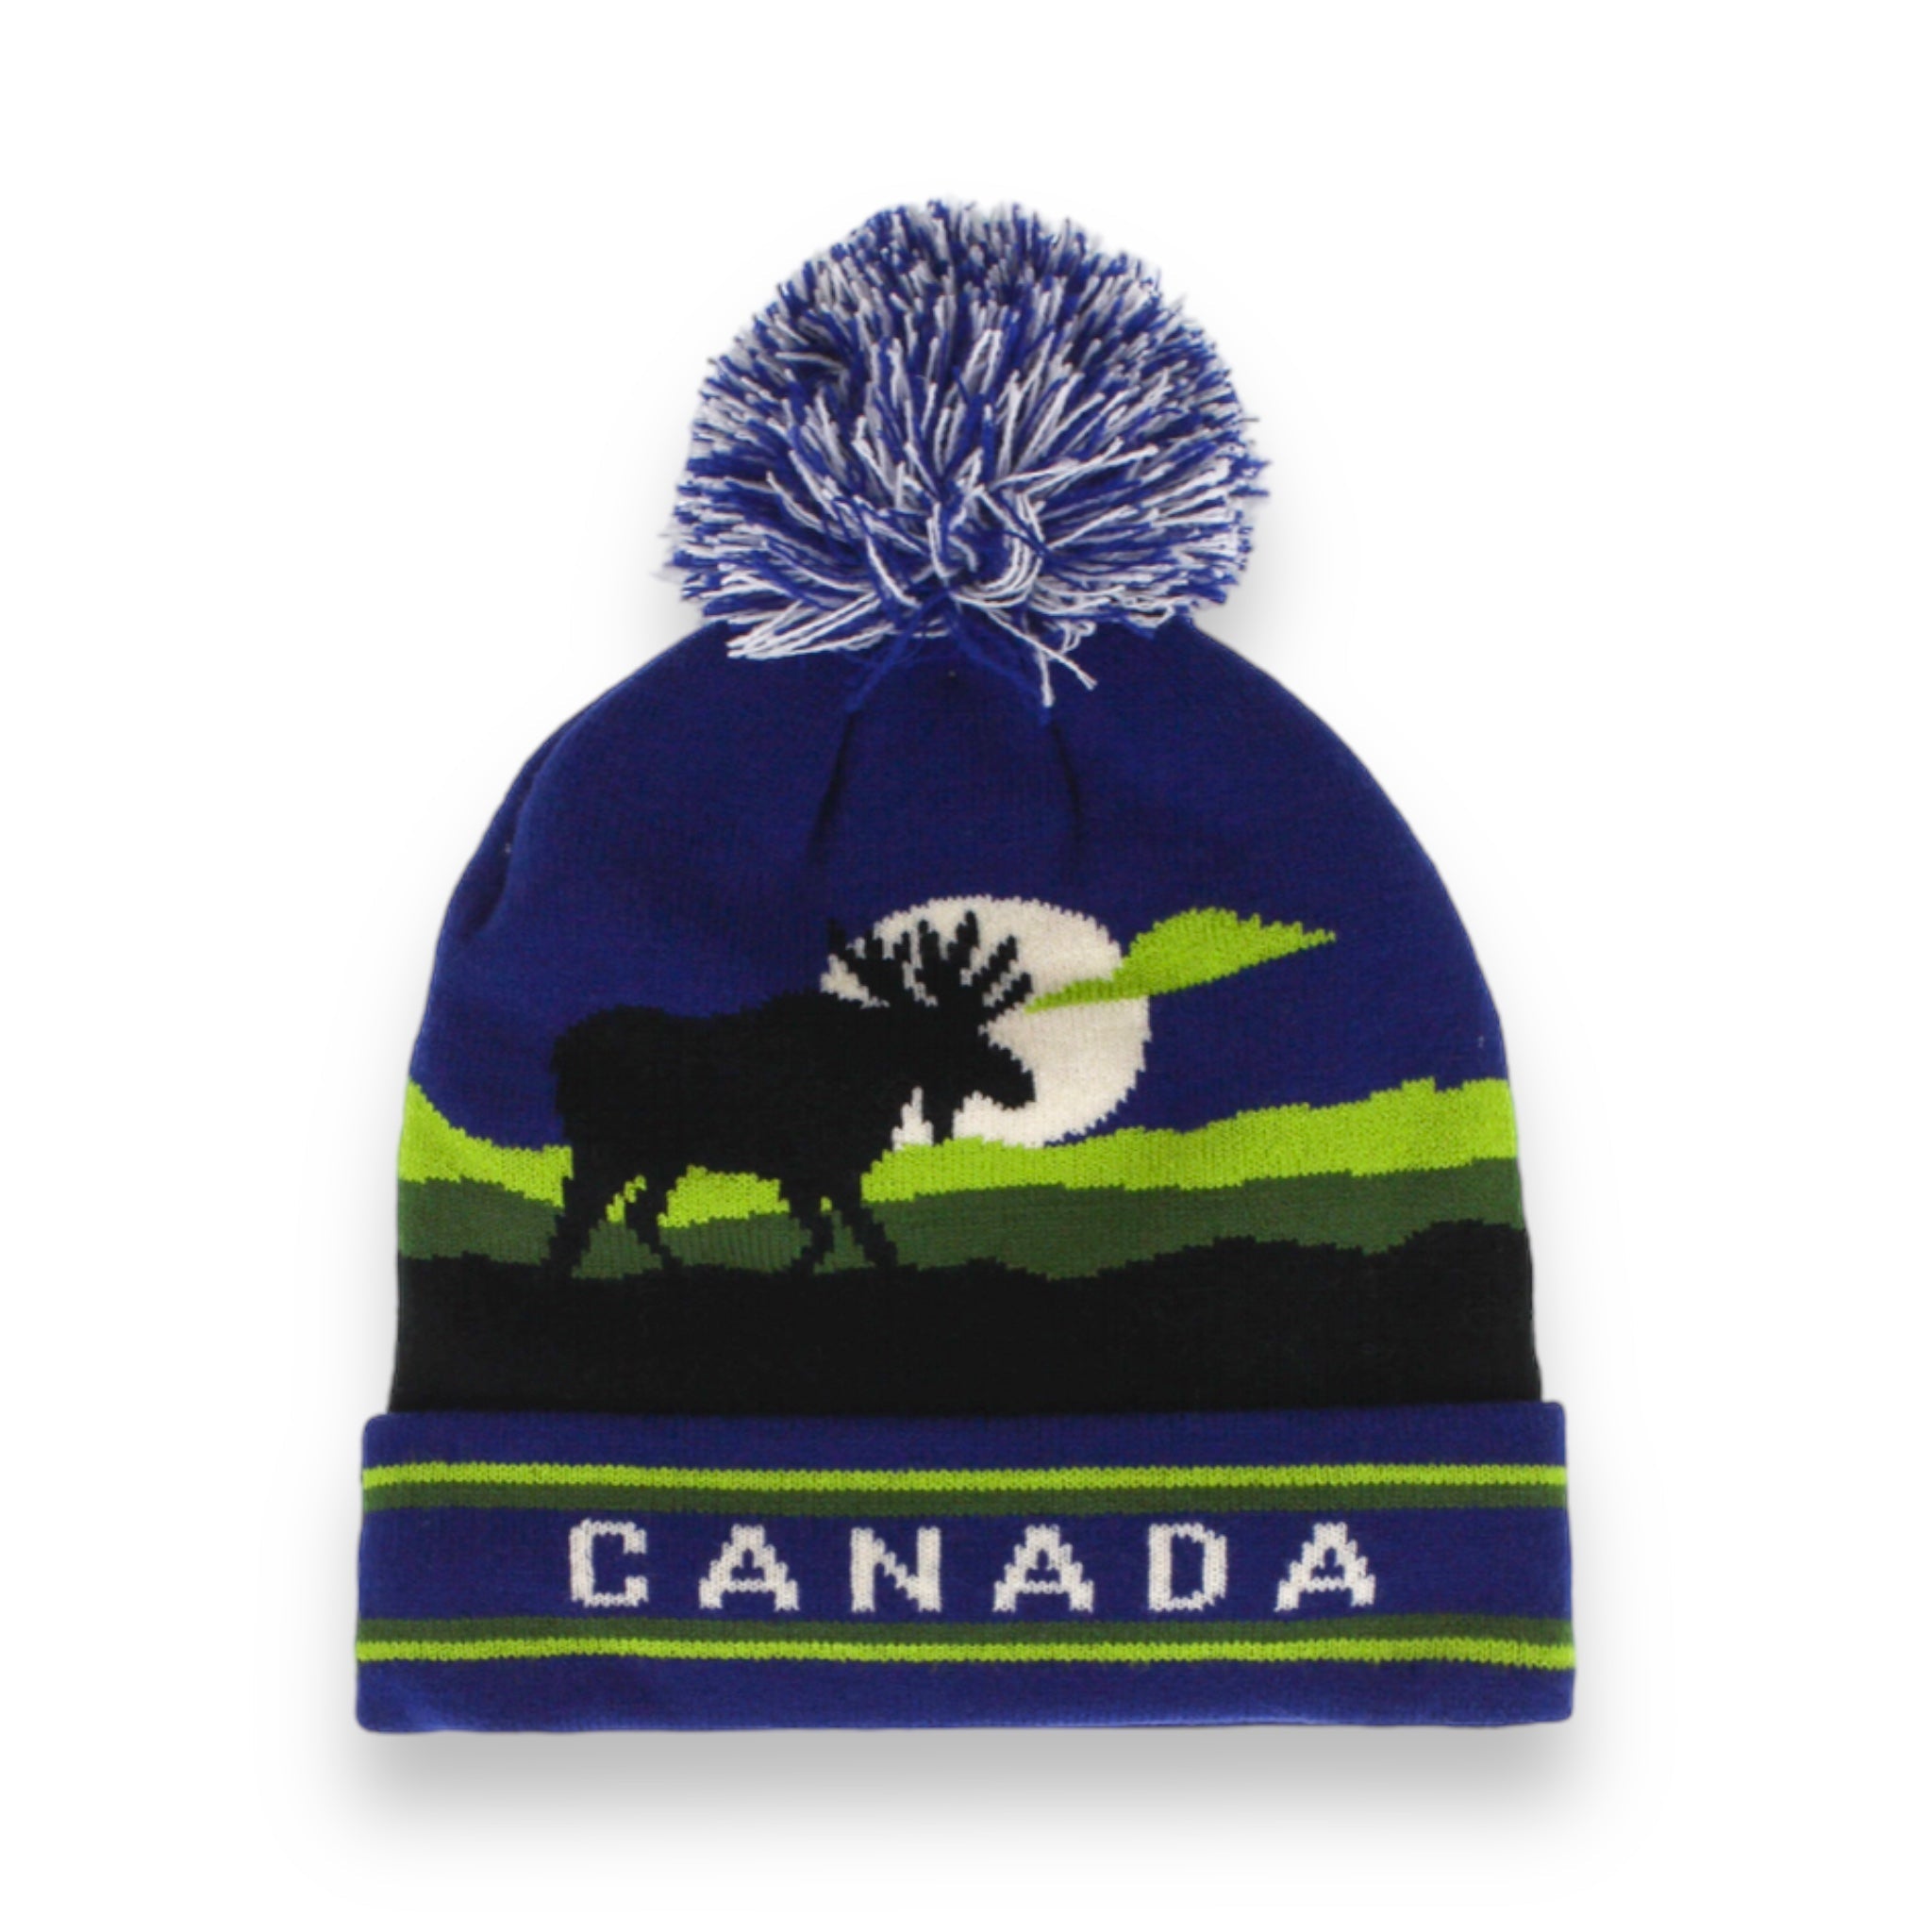 CANADA KIDS FLEECE LINED HAT WITH SCENIC LANDSCAPE MOOSE AND BEAR